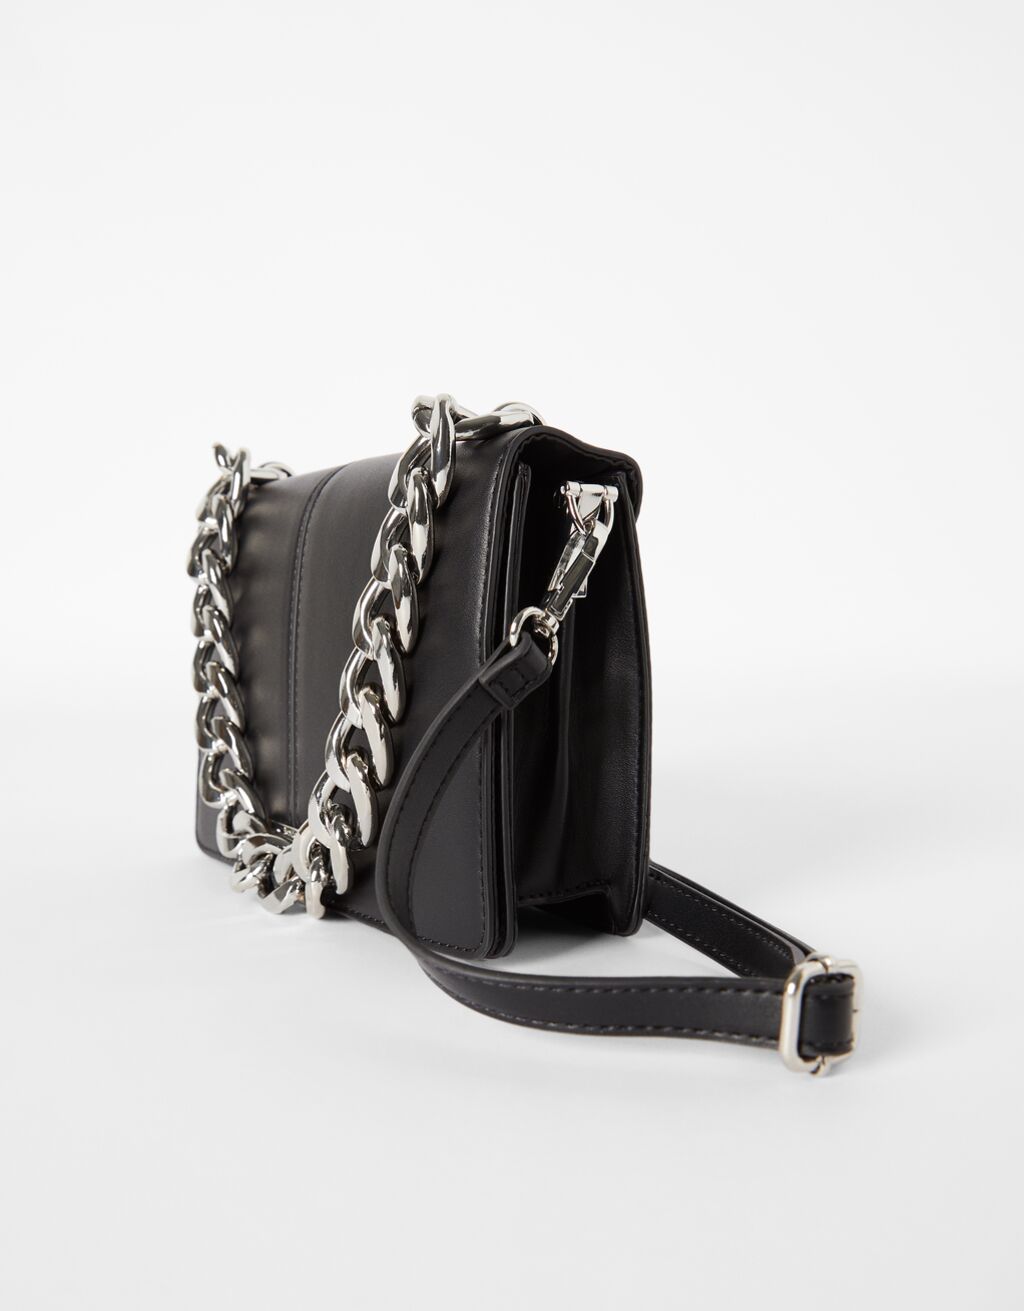 Accordion clutch with chain